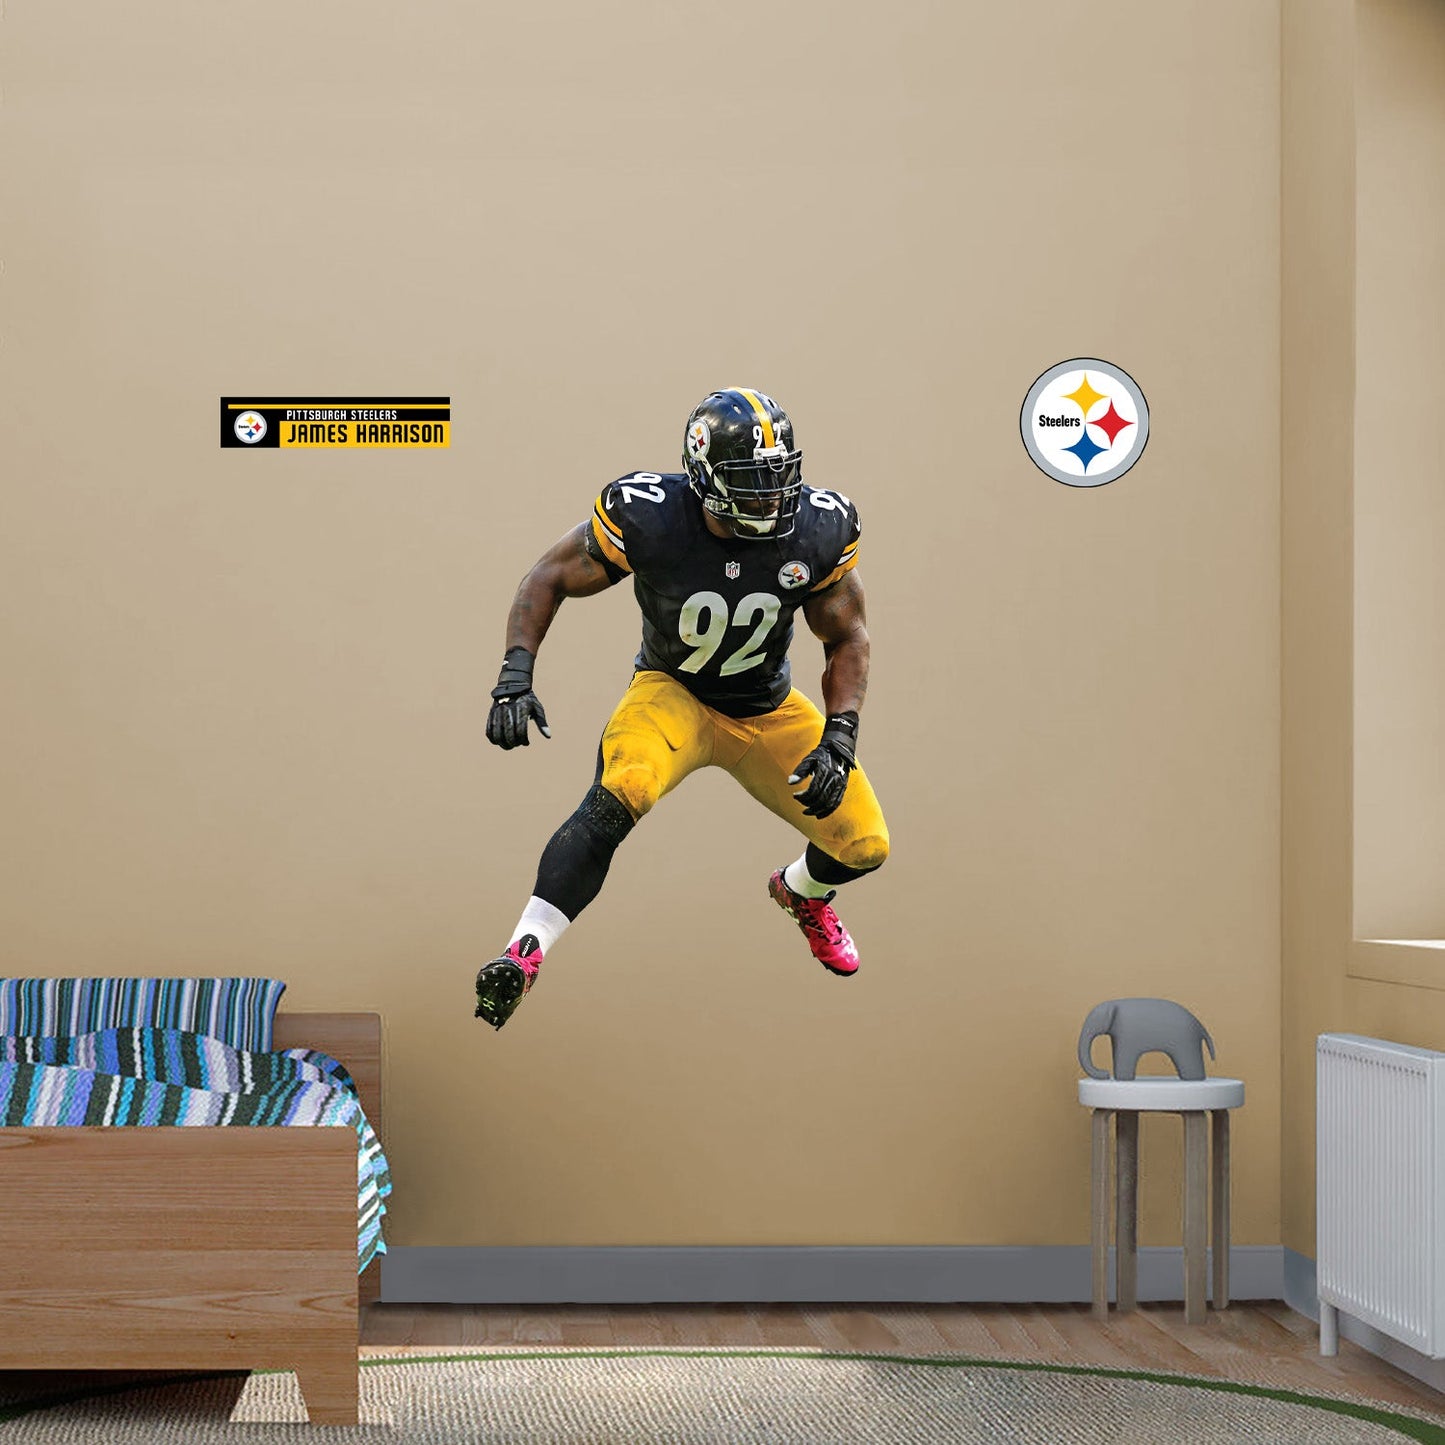 Pittsburgh Steelers: James Harrison Legend - Officially Licensed NFL Removable Adhesive Decal